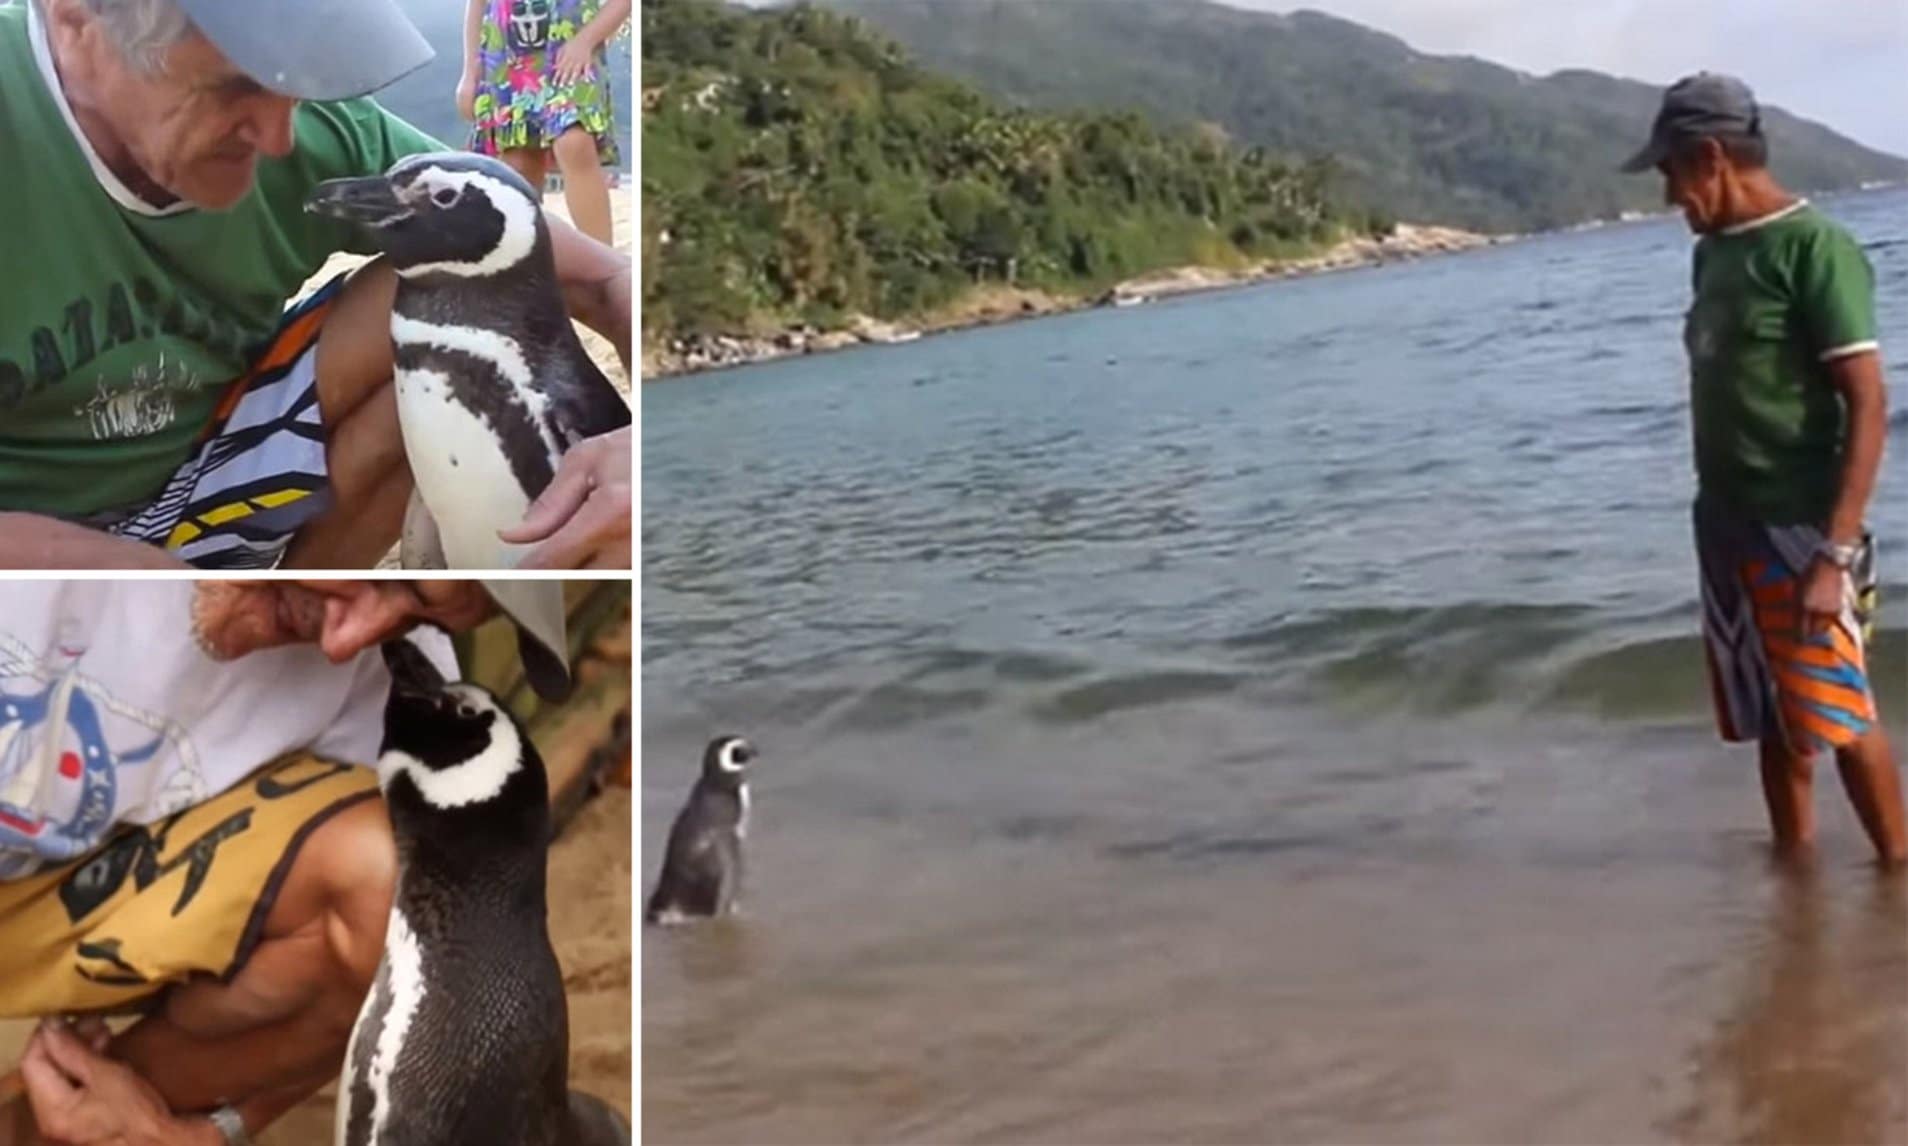 Penguin dindim returns every year to heroic fisherman who rescued him